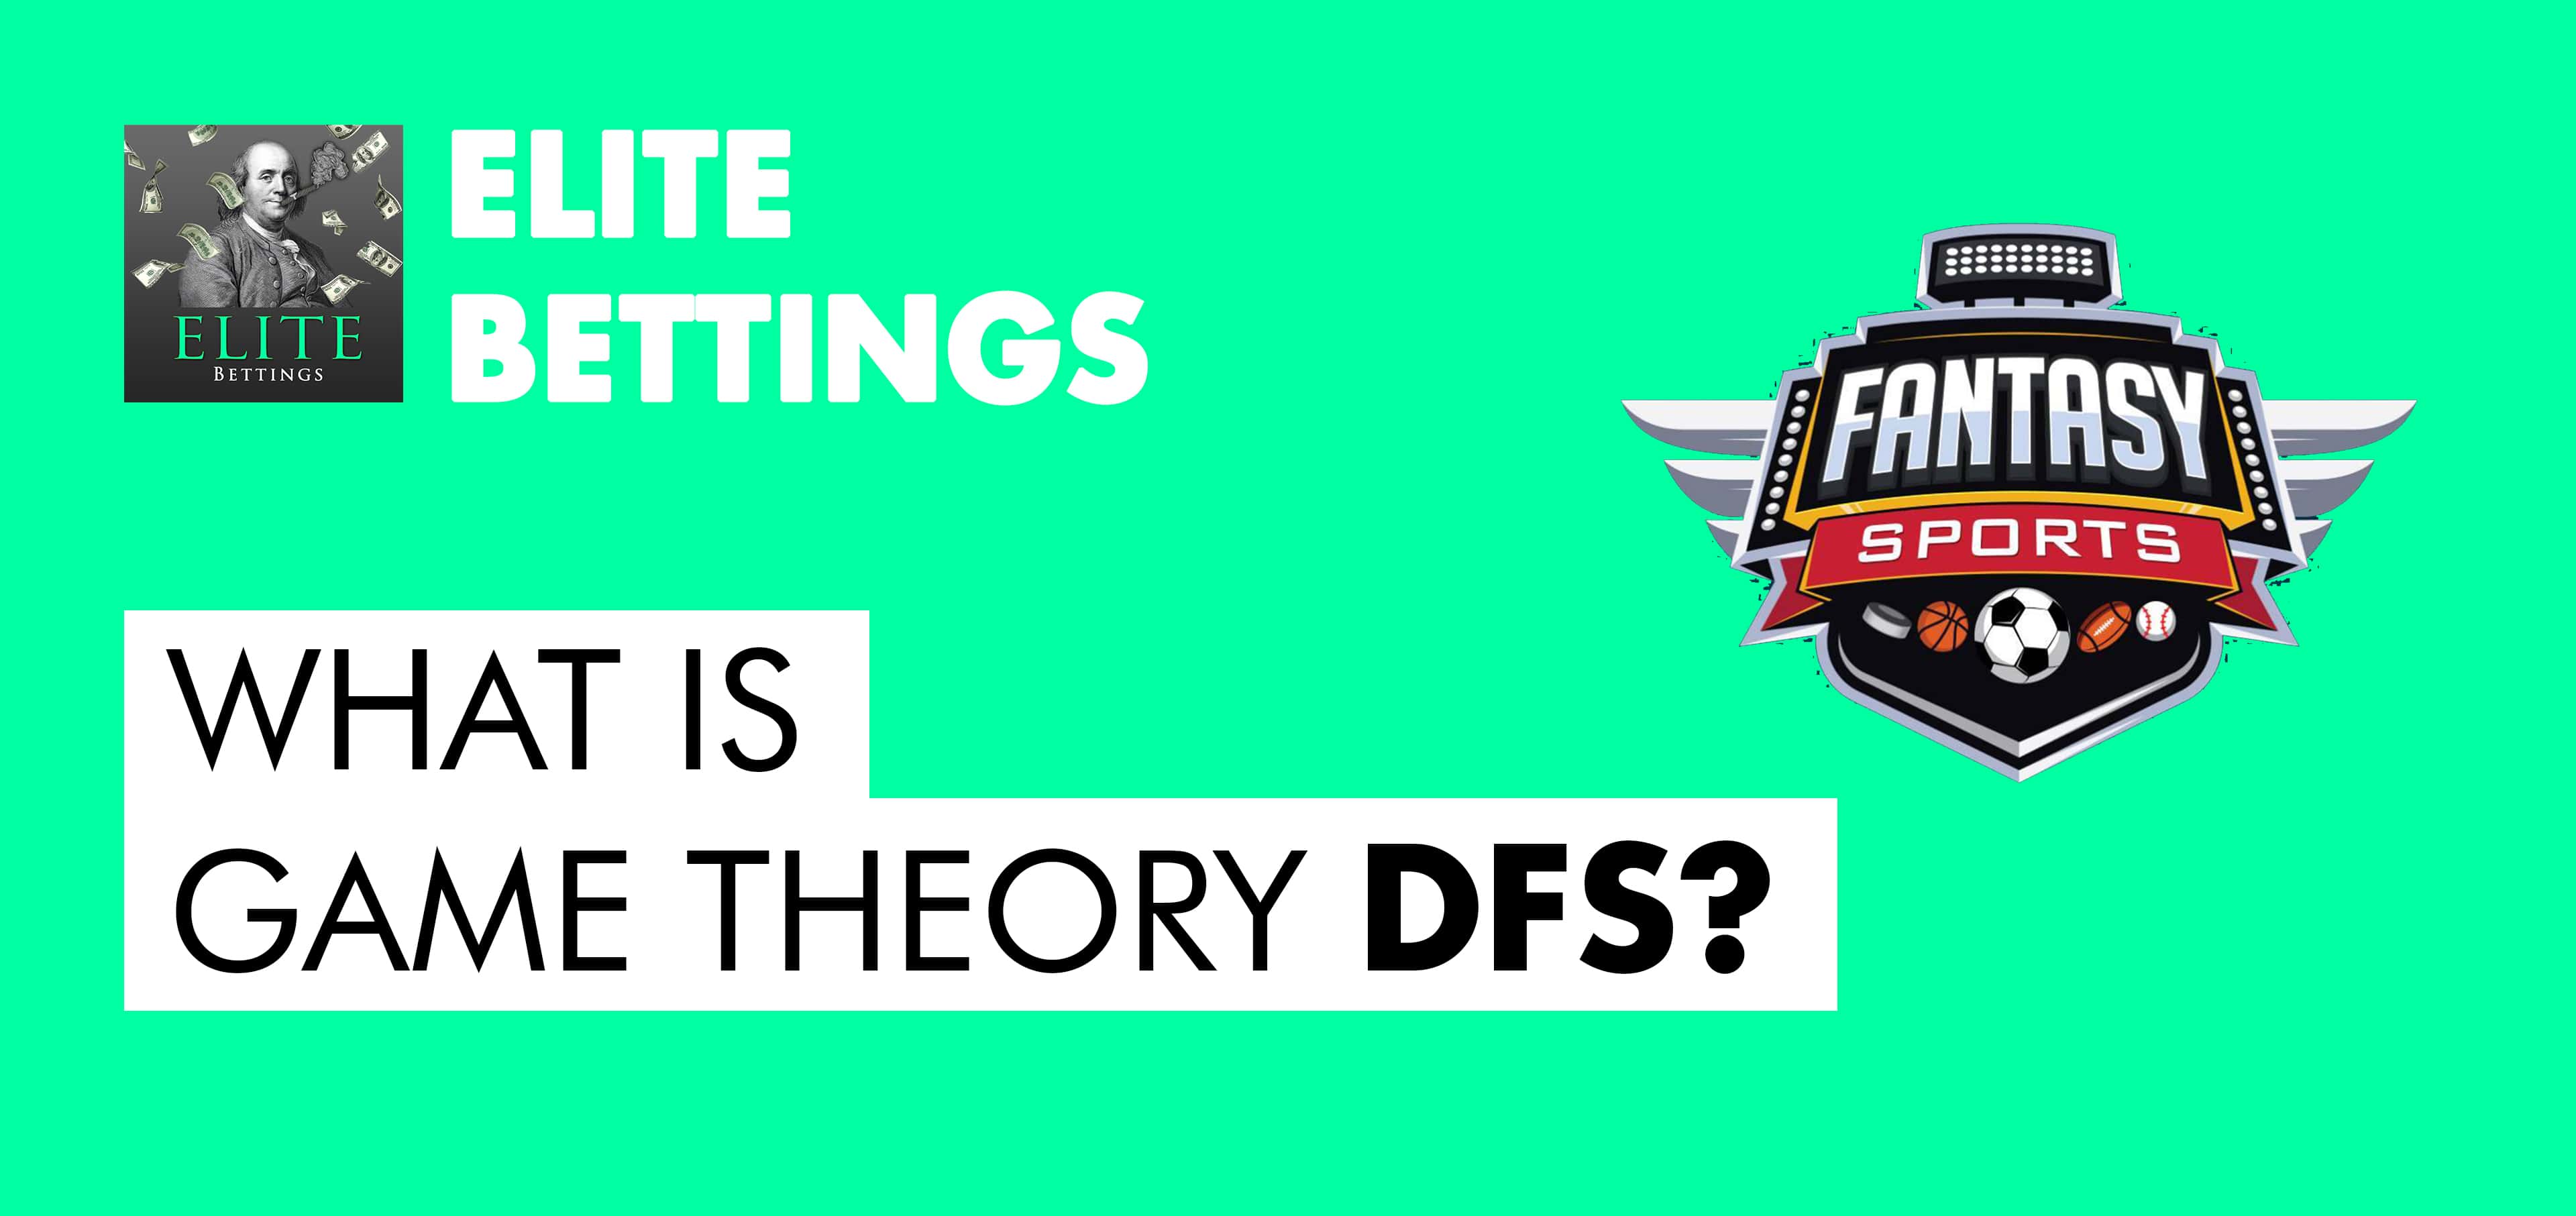 Game Theroy DFS | Elite Bettings